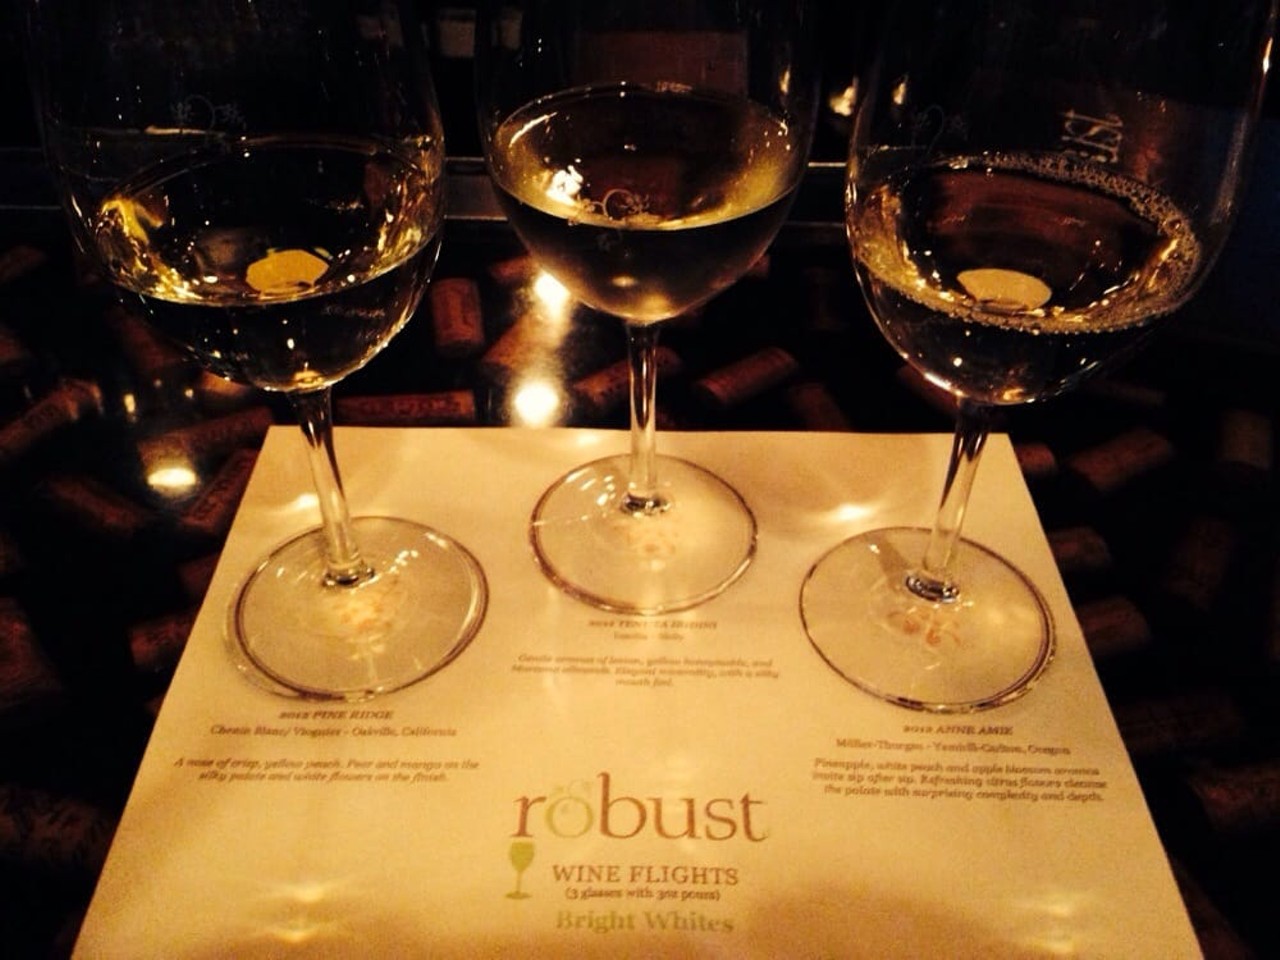 Robust Wine Bar
227 W. Lockwood Ave. 
Webster Groves, MO 63119
(314) 963-0033
Spend an evening in Webster Groves at Robust Wine Bar, where you'll find more than 40 wines by the glass. In addition to flights, tasting plates, gifts and other highlights, Robust also has a fire pit on its patio. Check out Robust's menu here, and make online reservations here. 
Photo courtesy of Yelp / Katie J.